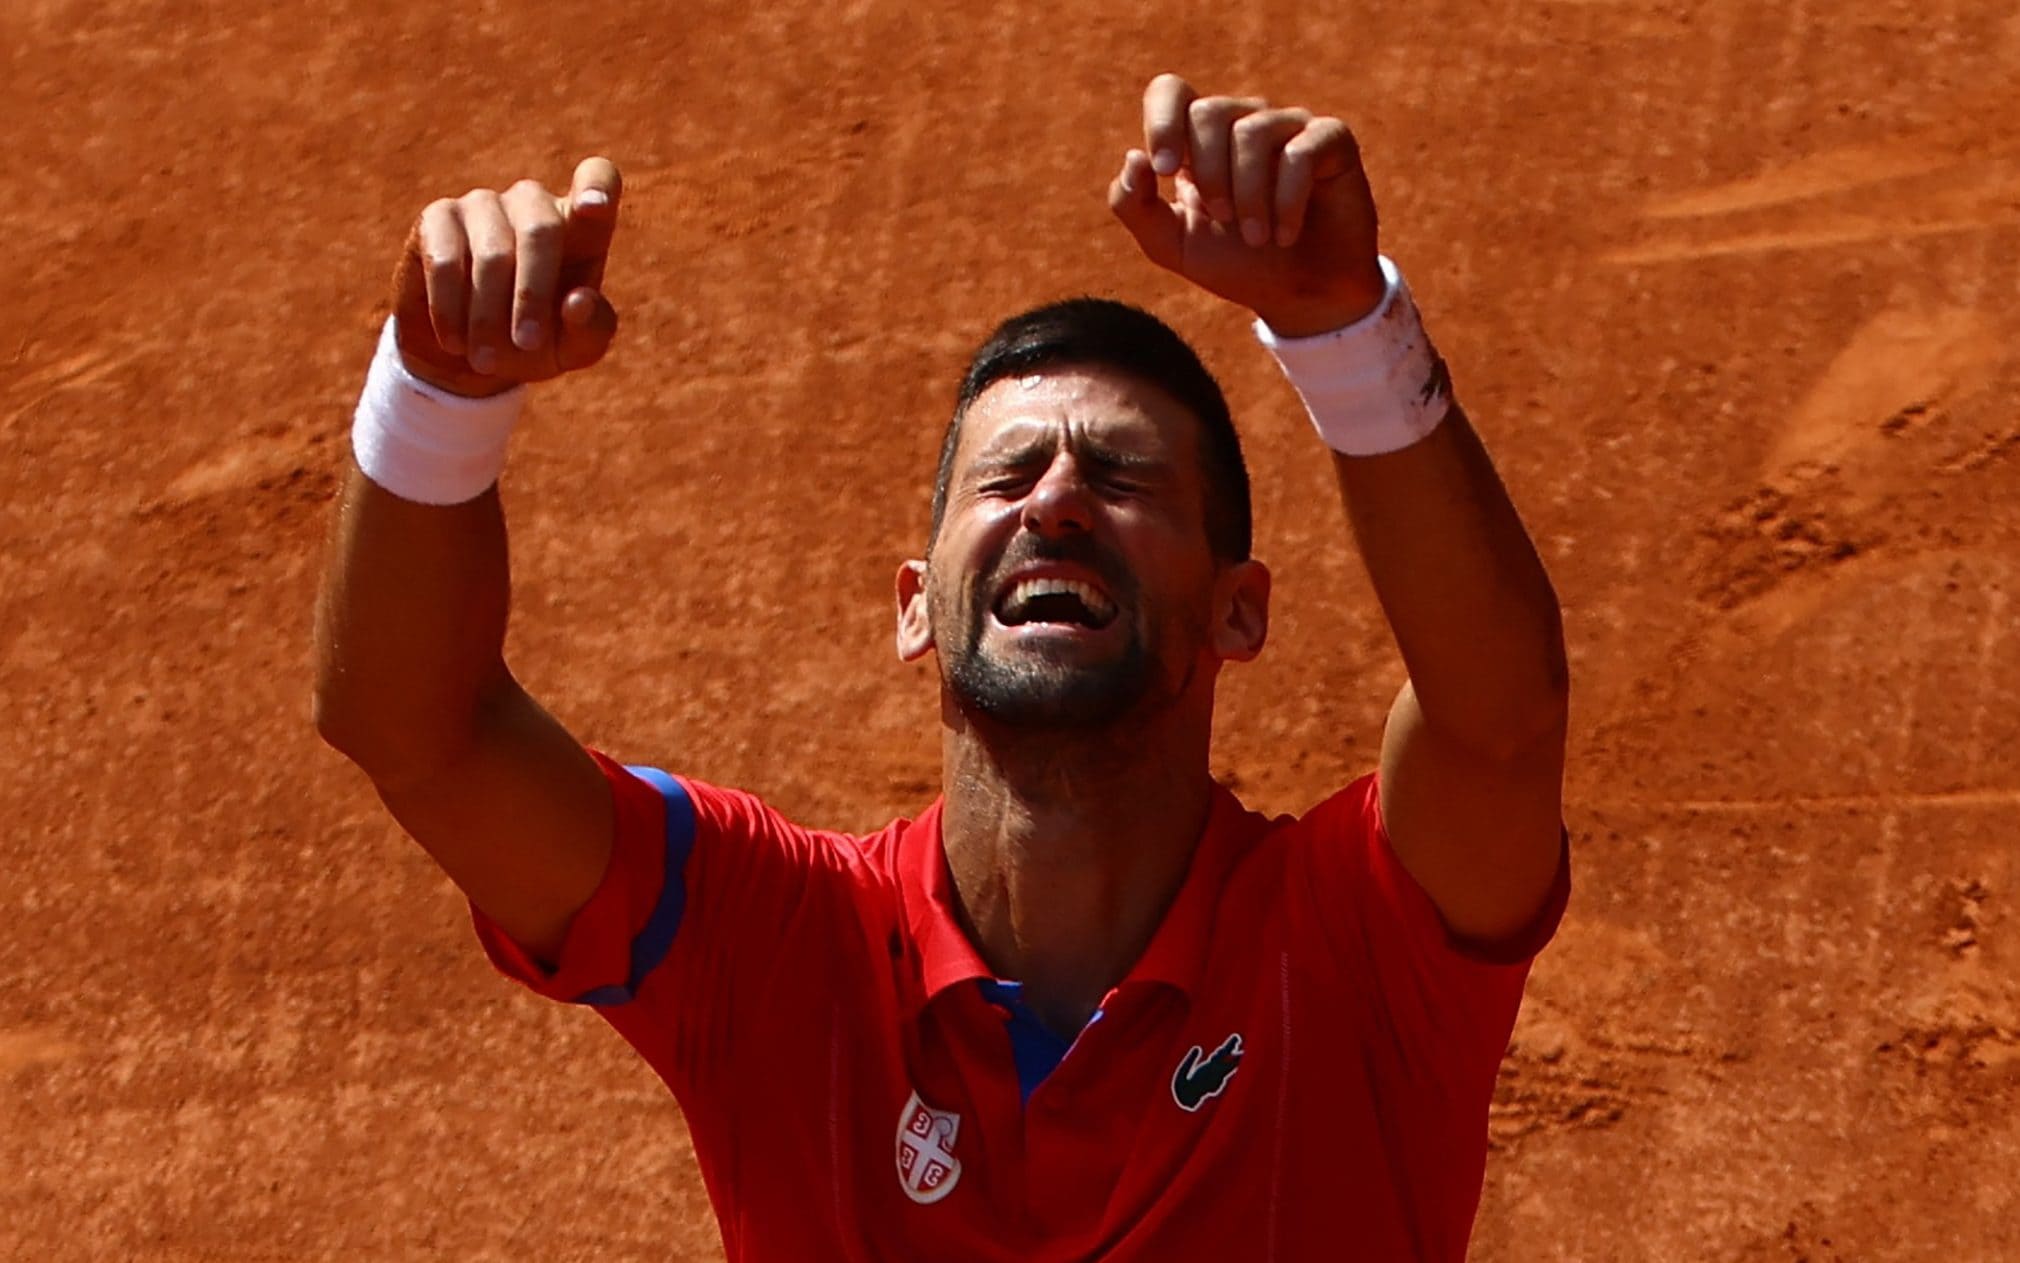 Djokovic completes tennis by beating Alcaraz to win Olympic gold in Paris